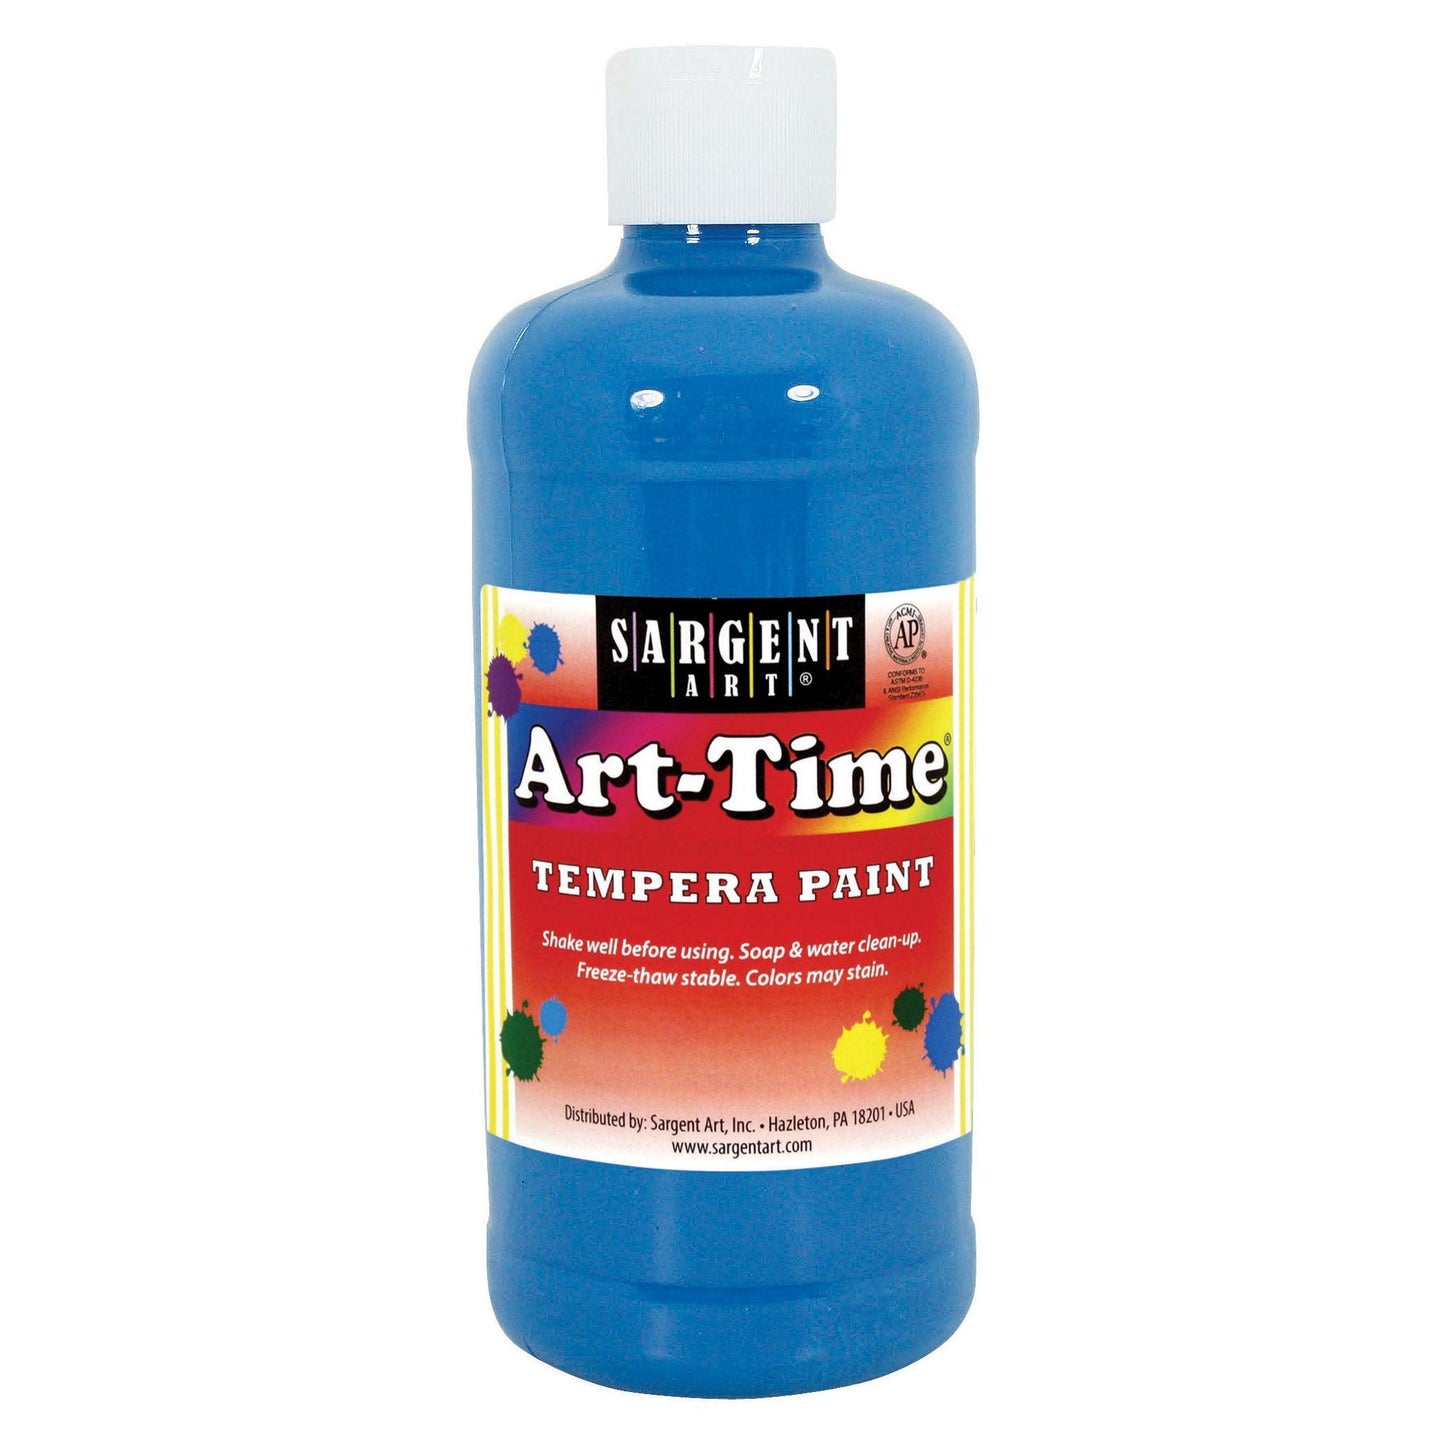 Art-Time® Tempera Paint, Turquoise, 16 oz., Pack of 12 - Loomini